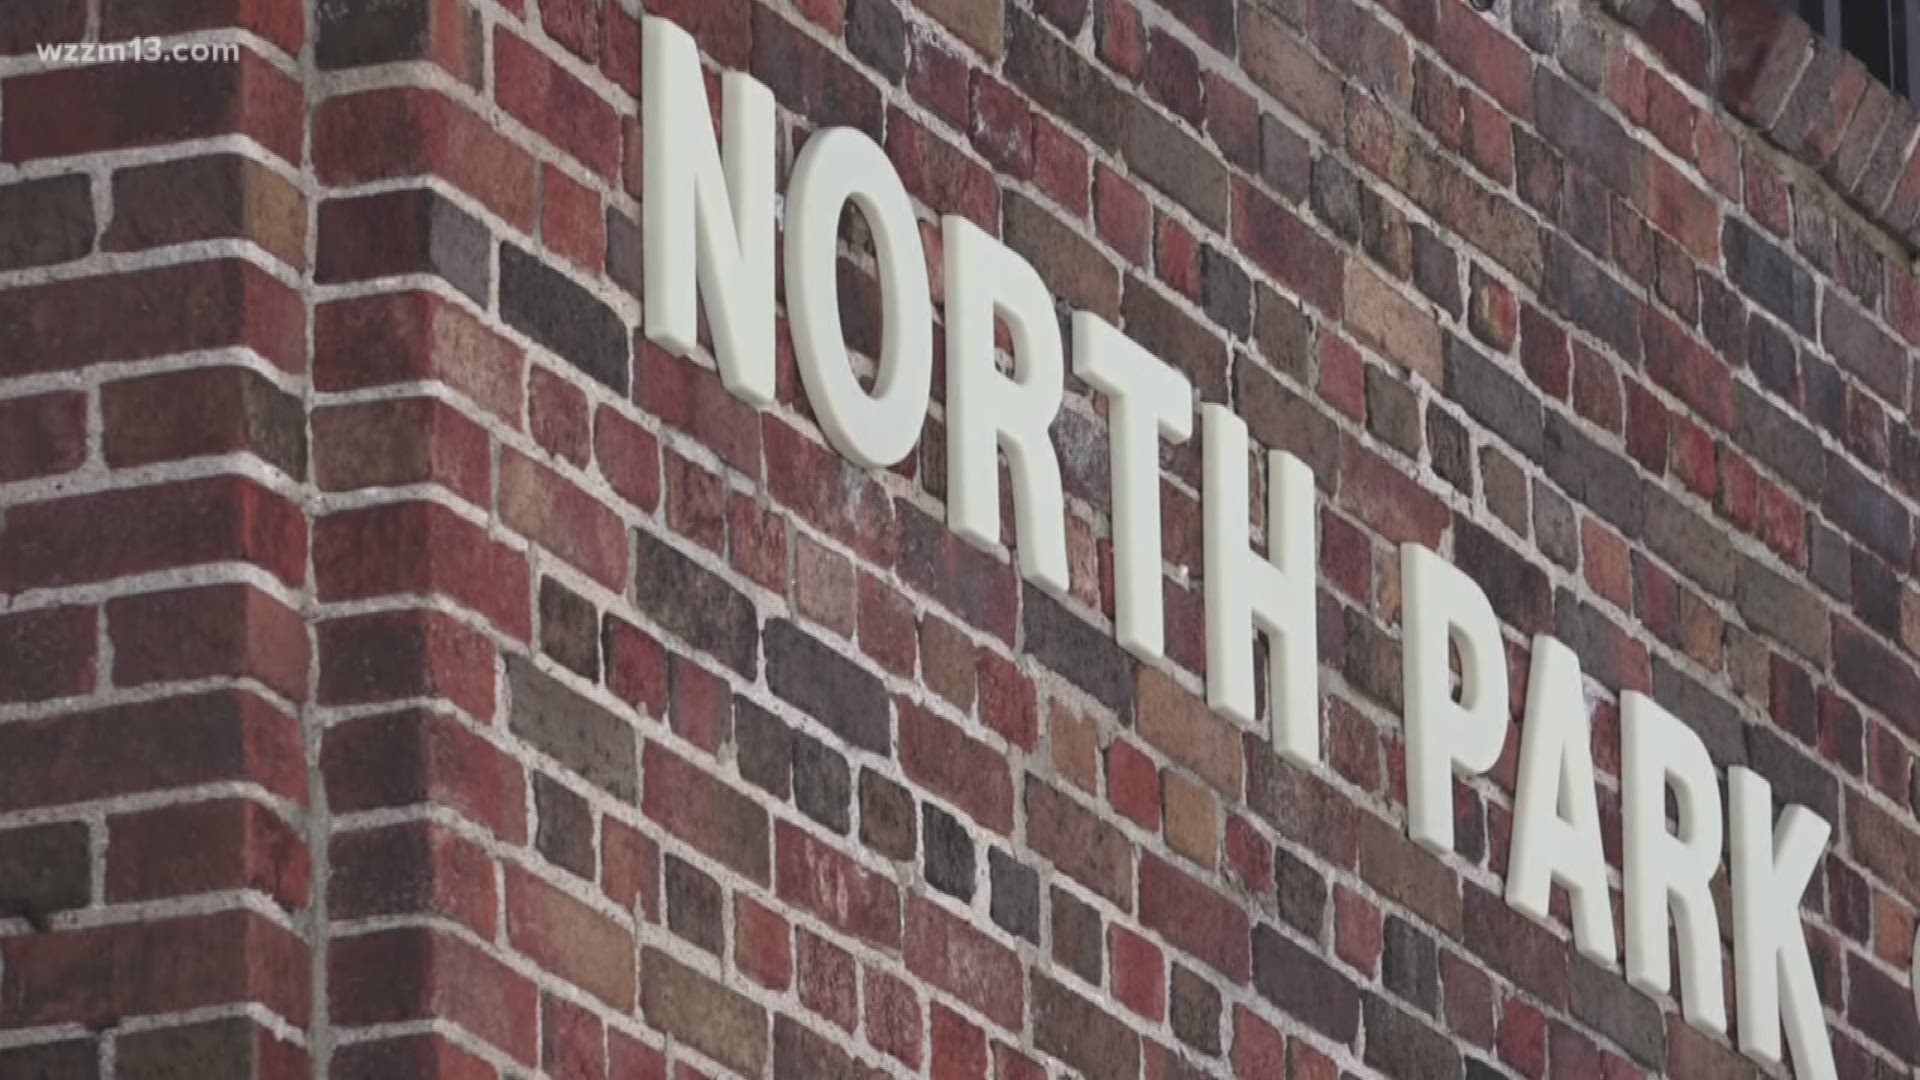 School is nearly over for Grand Rapids Public Schools, but the work at North Park Montessori hasn't stopped. A cleaning plan has been developed and now, on May 15, contractor proposals are being returned.